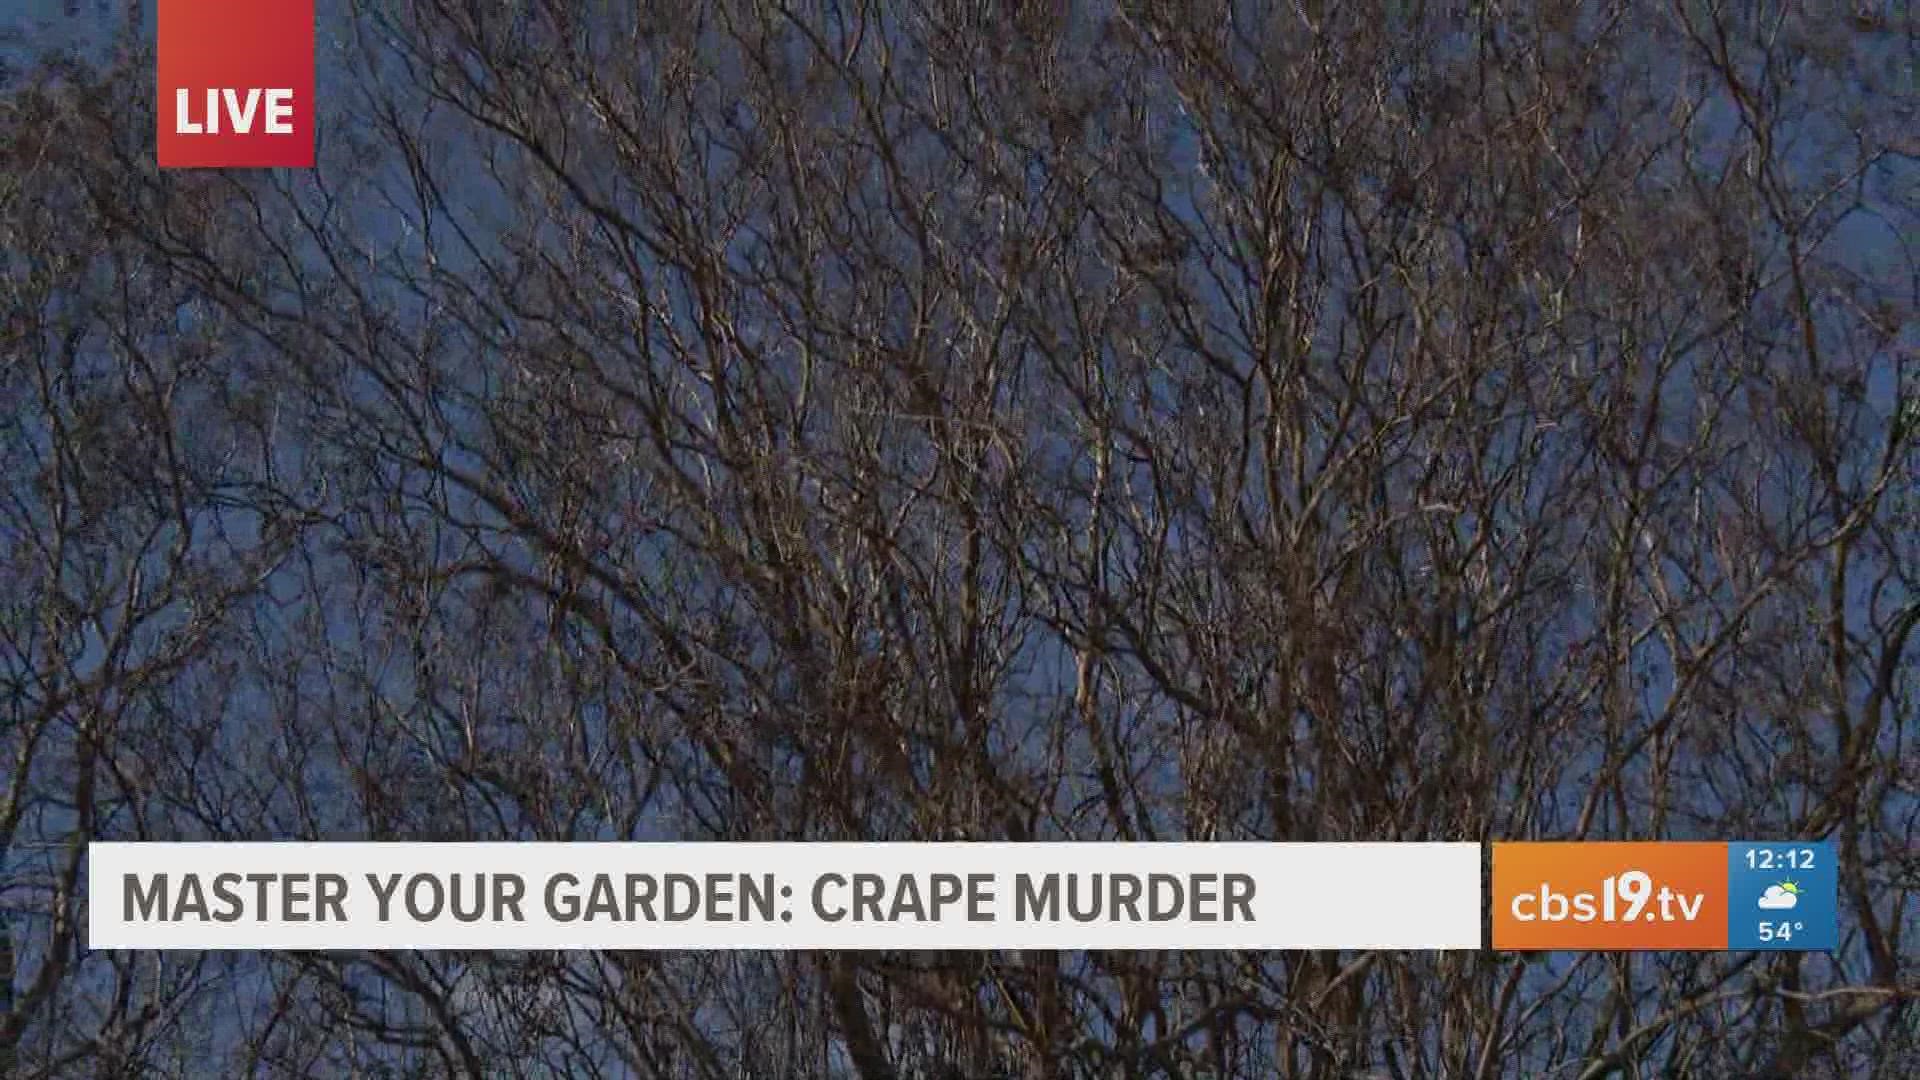 The Smith County Master Gardeners tell you how to not be blamed for "Crape Murder."